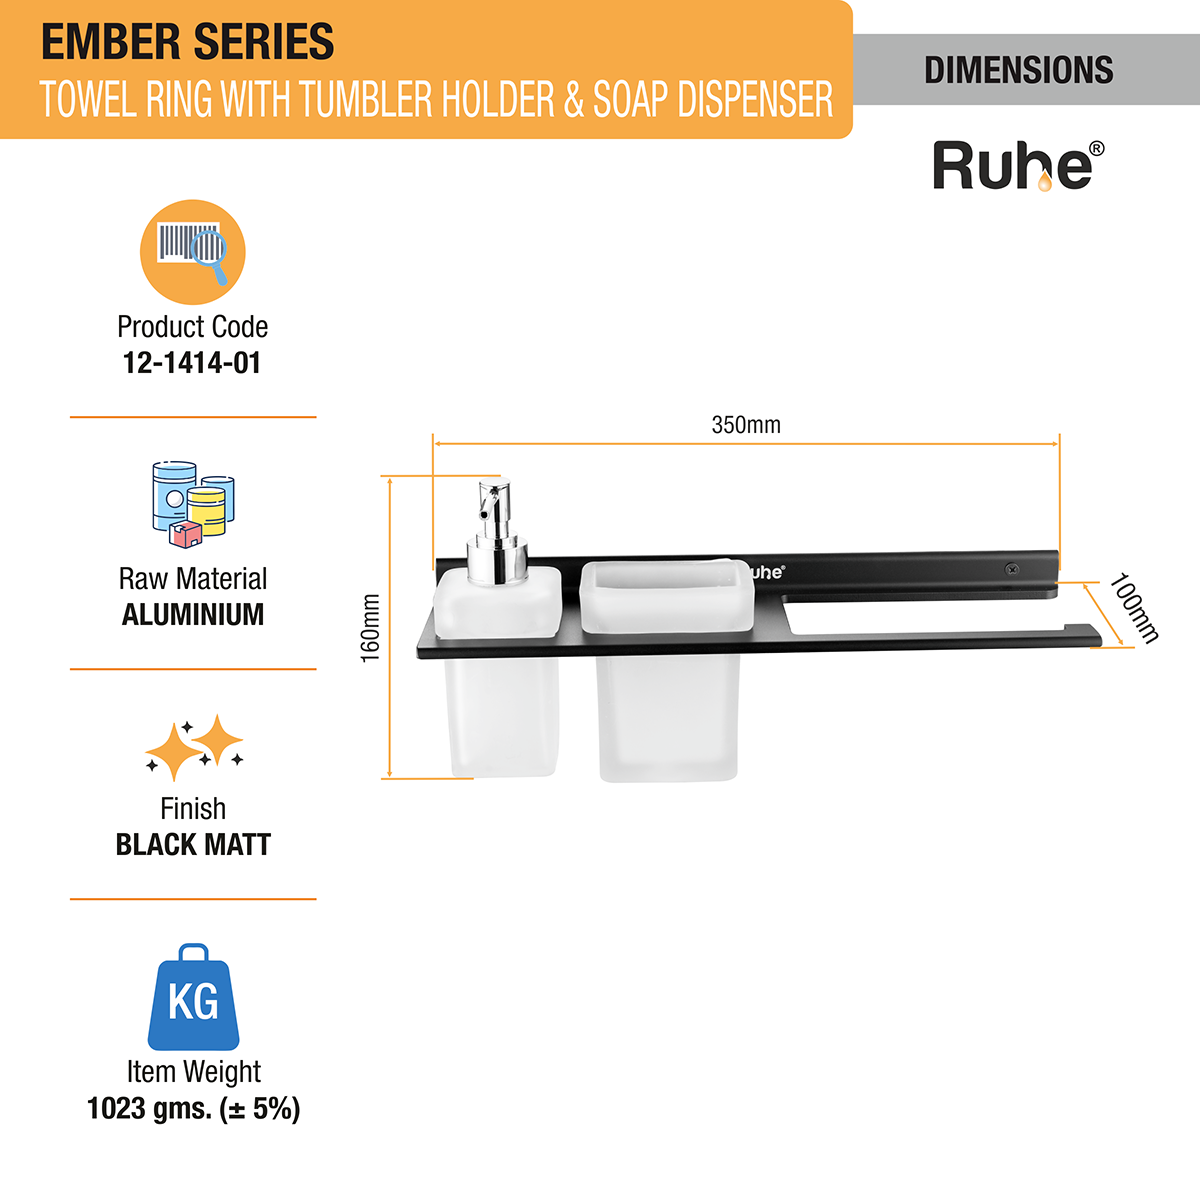 Ember Towel Ring with Tumbler Holder & Soap Dispenser (Space Aluminium) dimensions and sizes